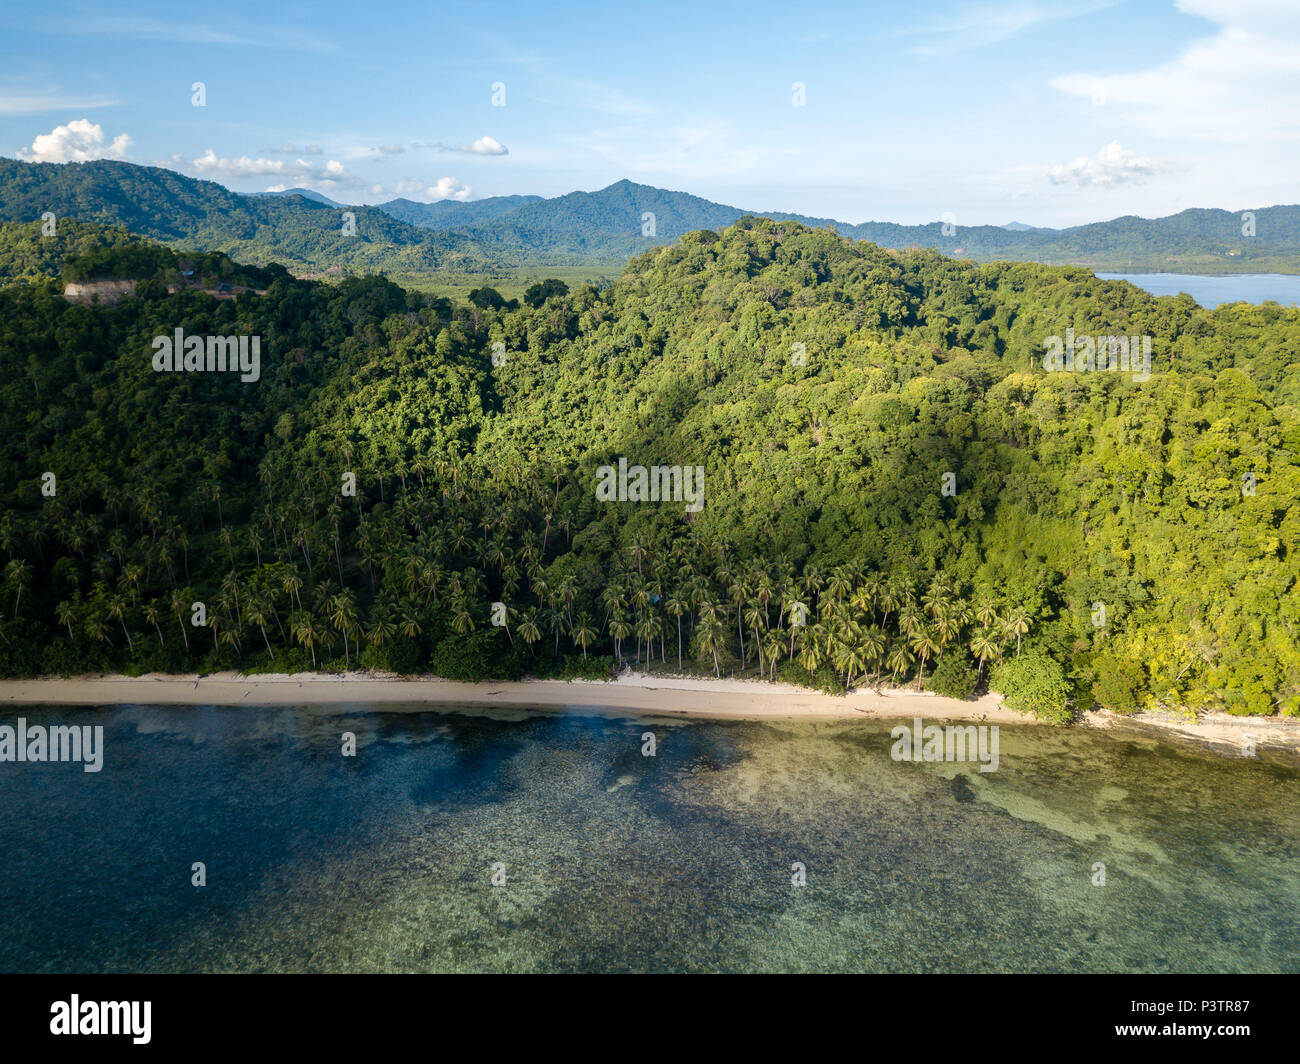 Aerial drone view of a beautiful tropical bay with reef, sandy beach and jungle scenery Stock Photo